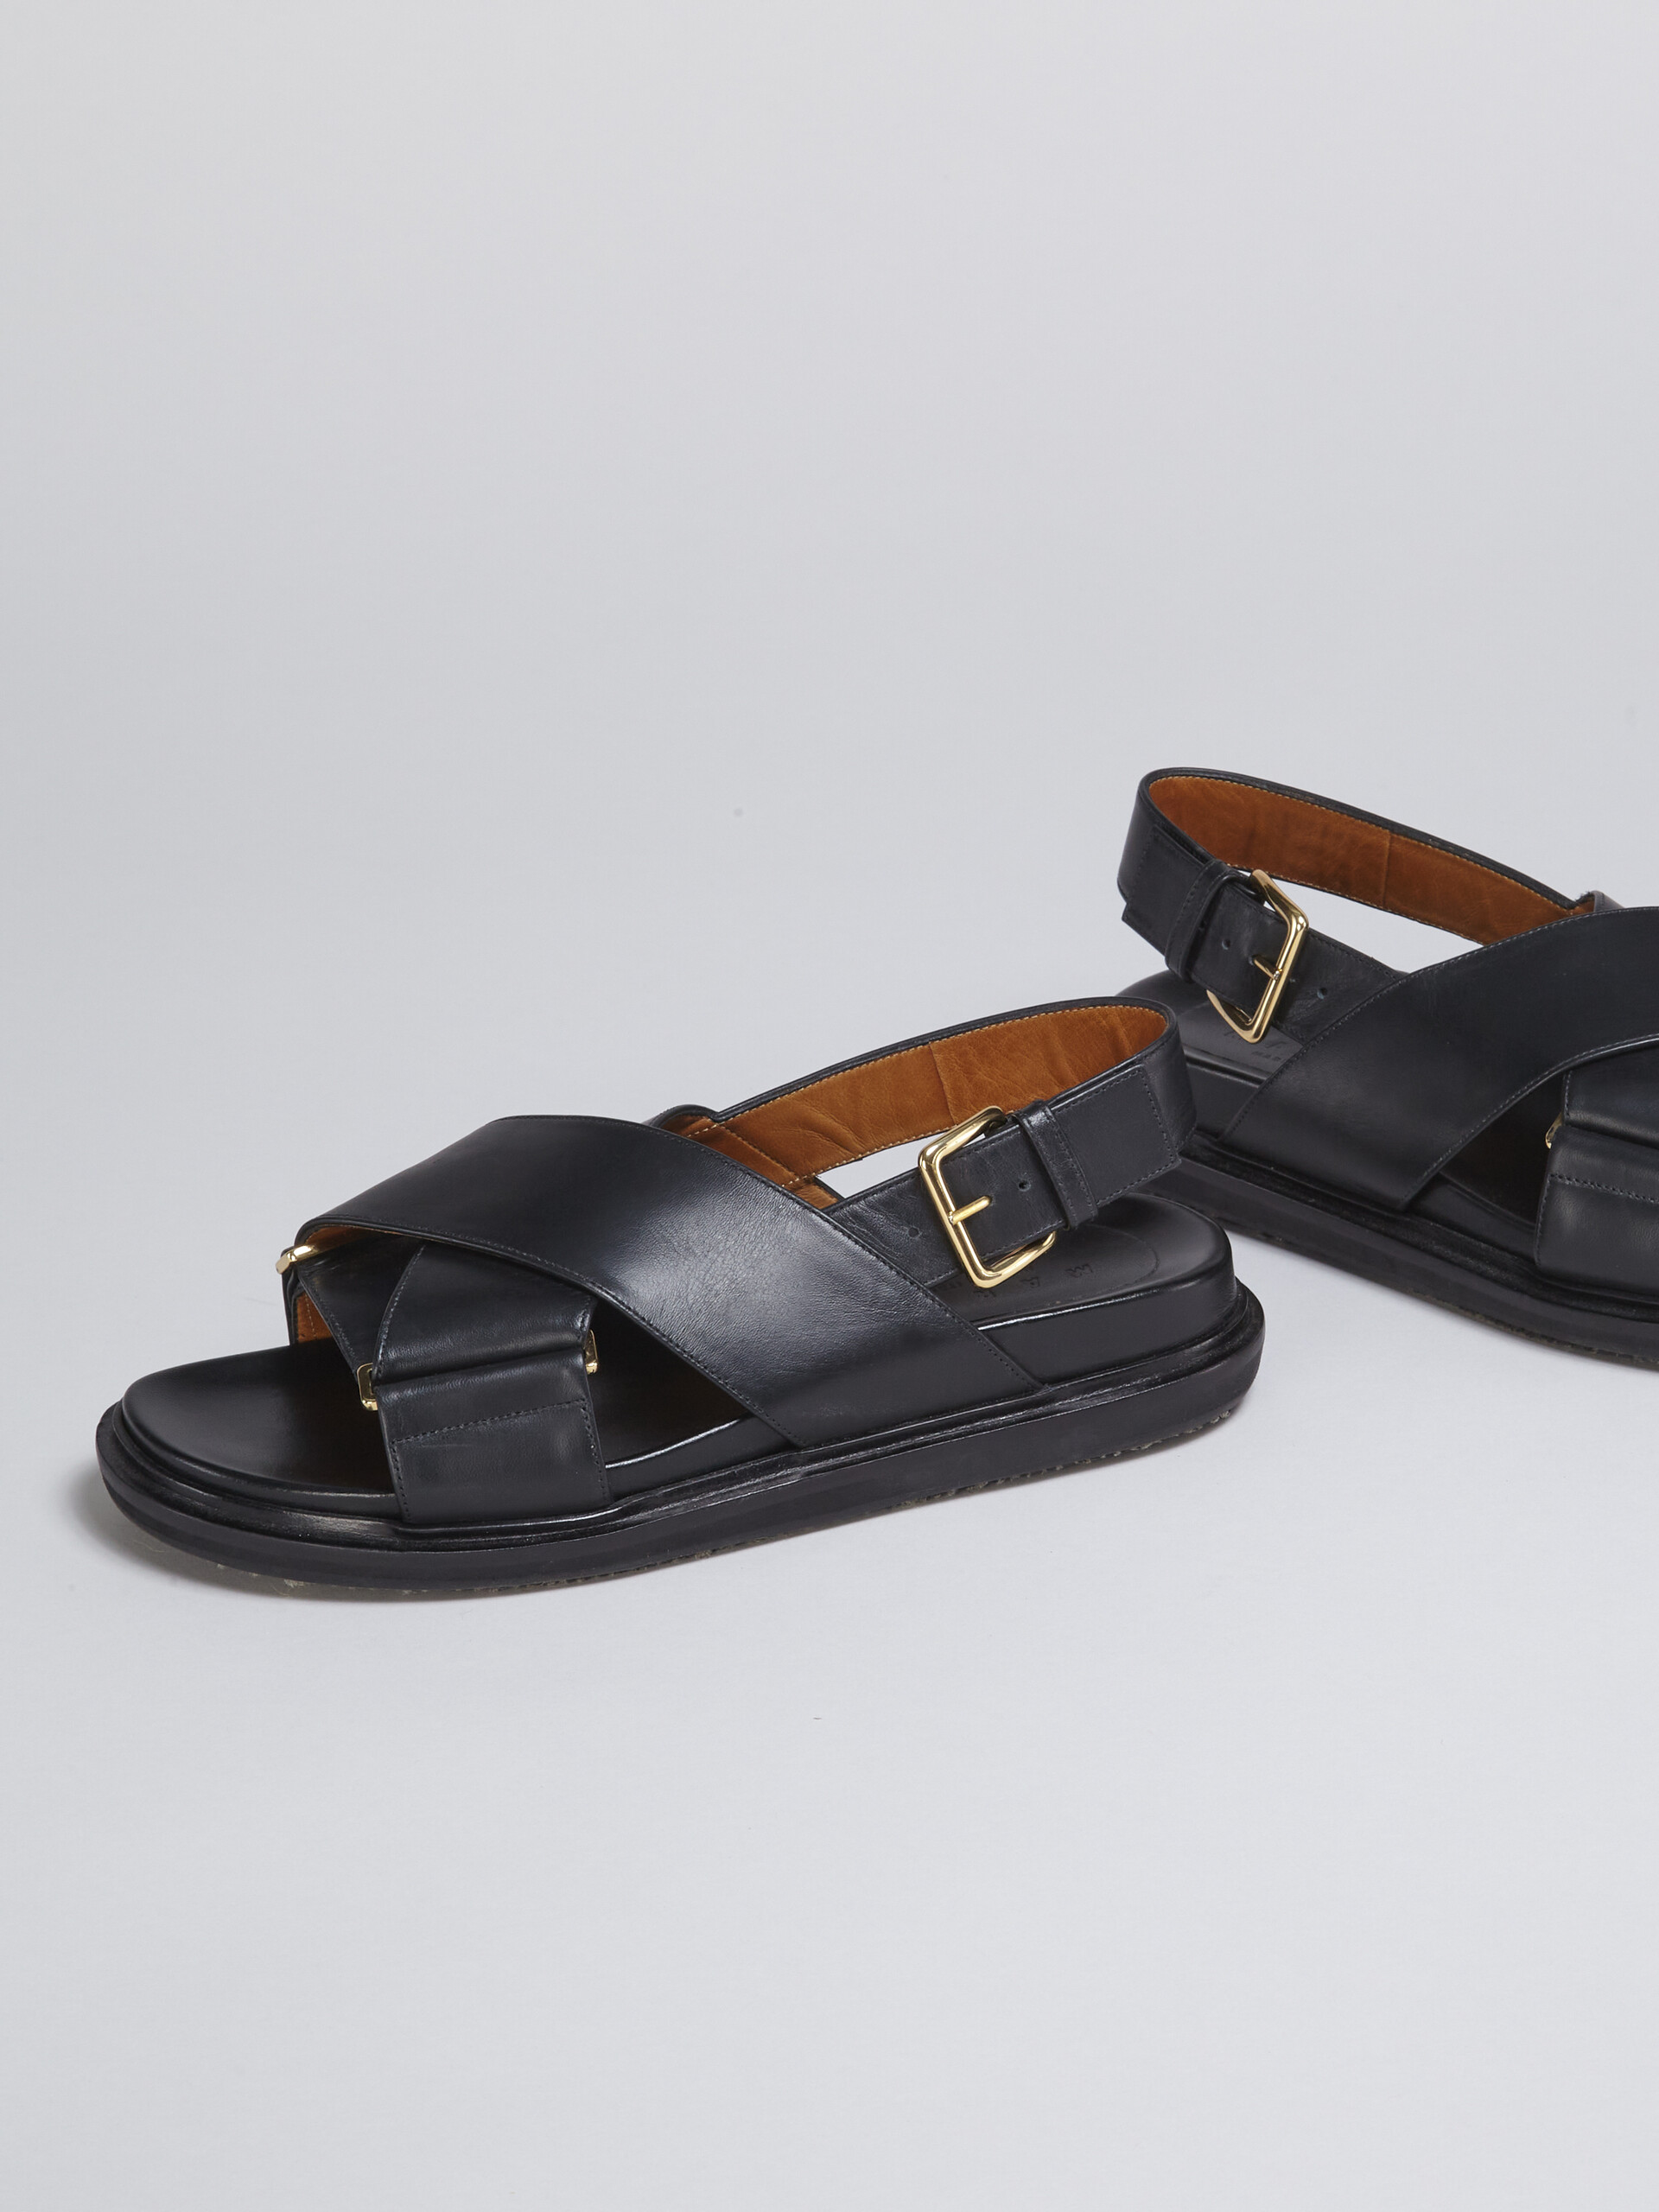 Black smooth calf leather fussbett - Sandals - Image 5